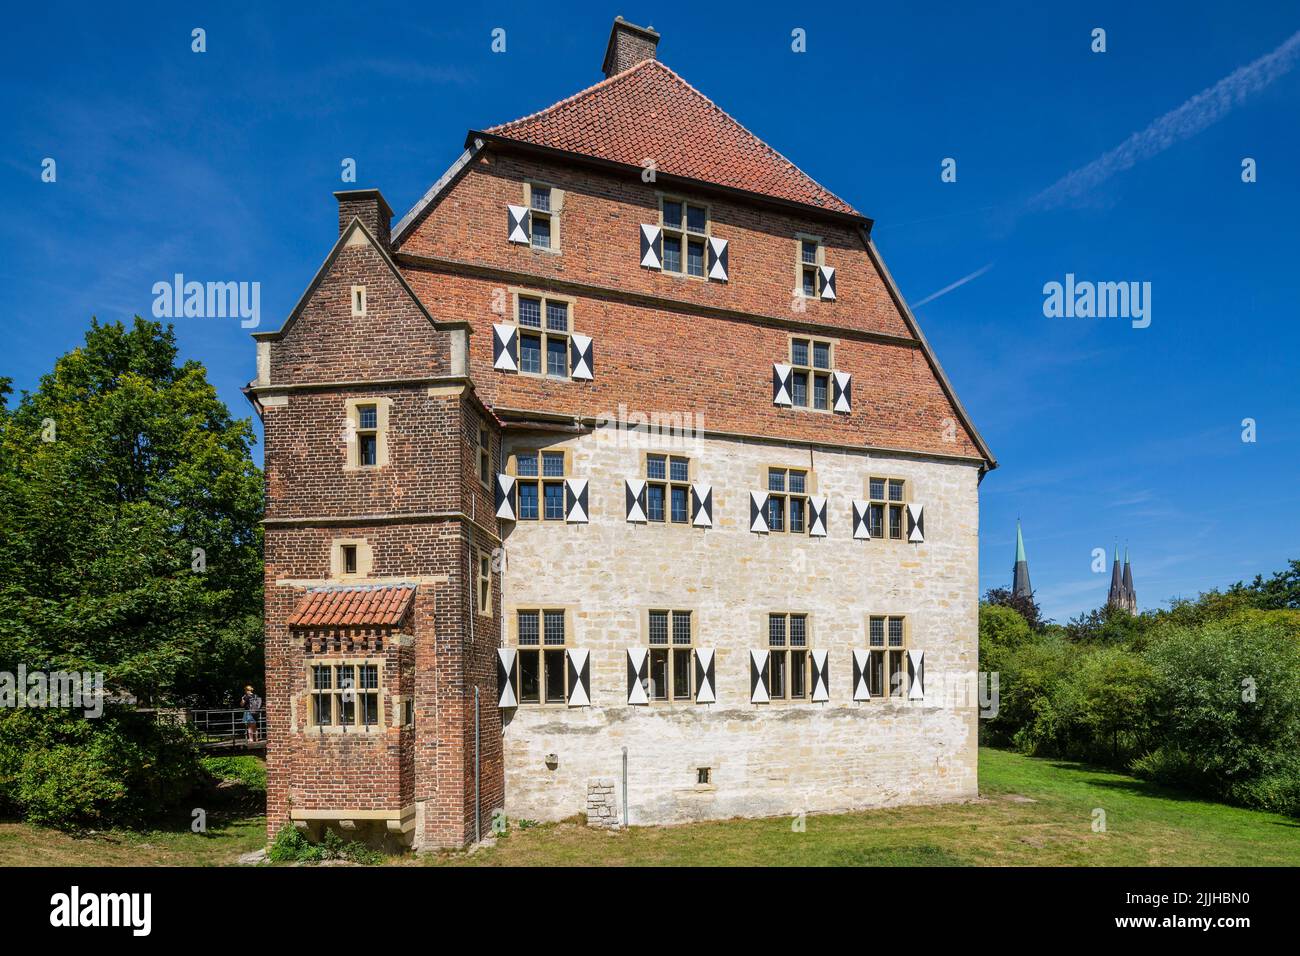 Germany, Billerbeck, Berkel, Baumberge, Muensterland, Westphalia, North Rhine-Westphalia, NRW, Kolvenburg, former moated castle, event location, exhibition venue, tourist attraction, behind the towers of the Johannis Church and the Ludgerus Cathedral Stock Photo